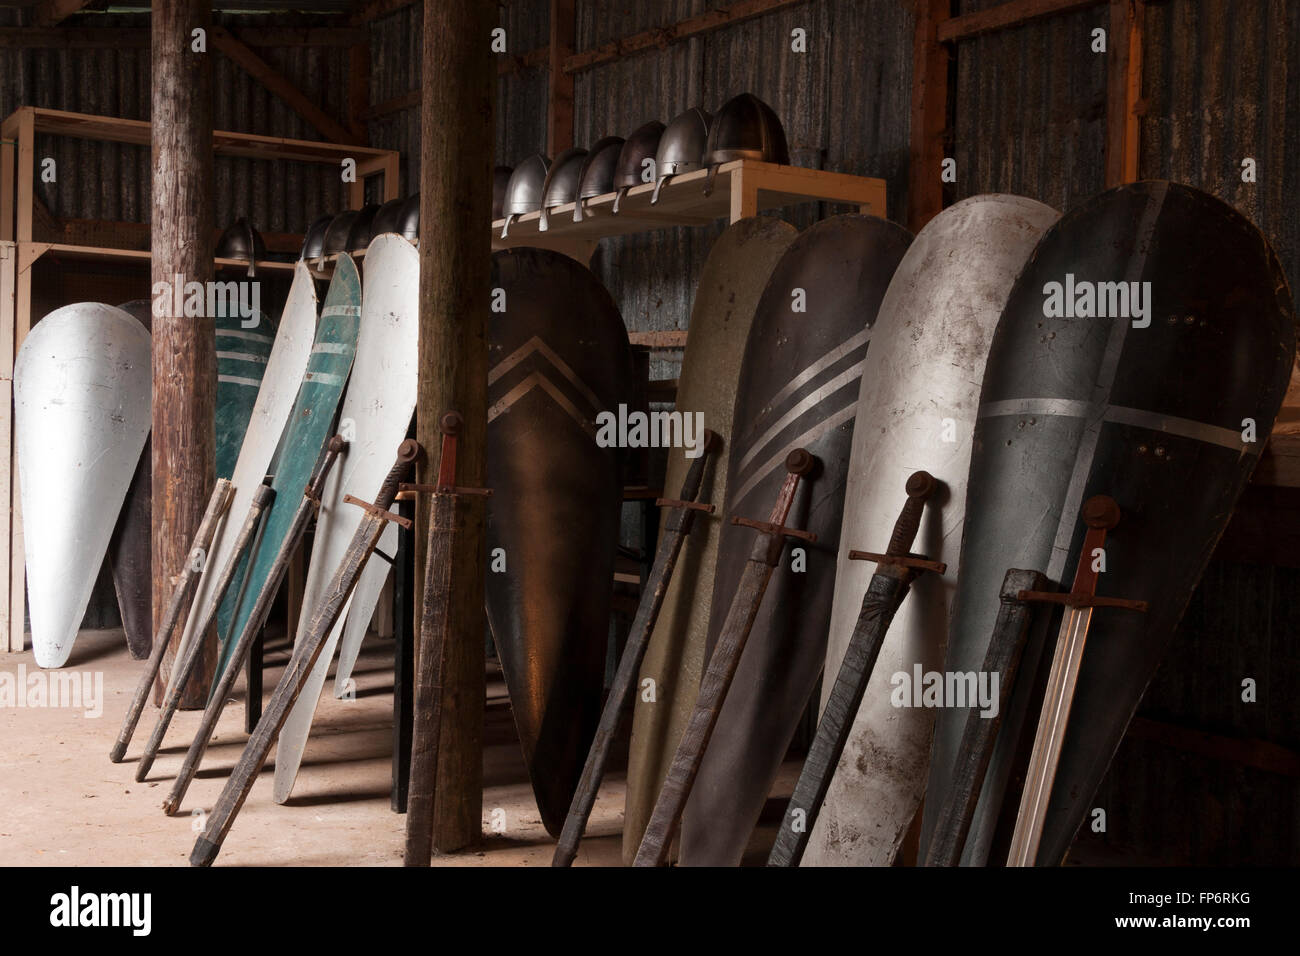 Norman weapons displayed in a barn Stock Photo